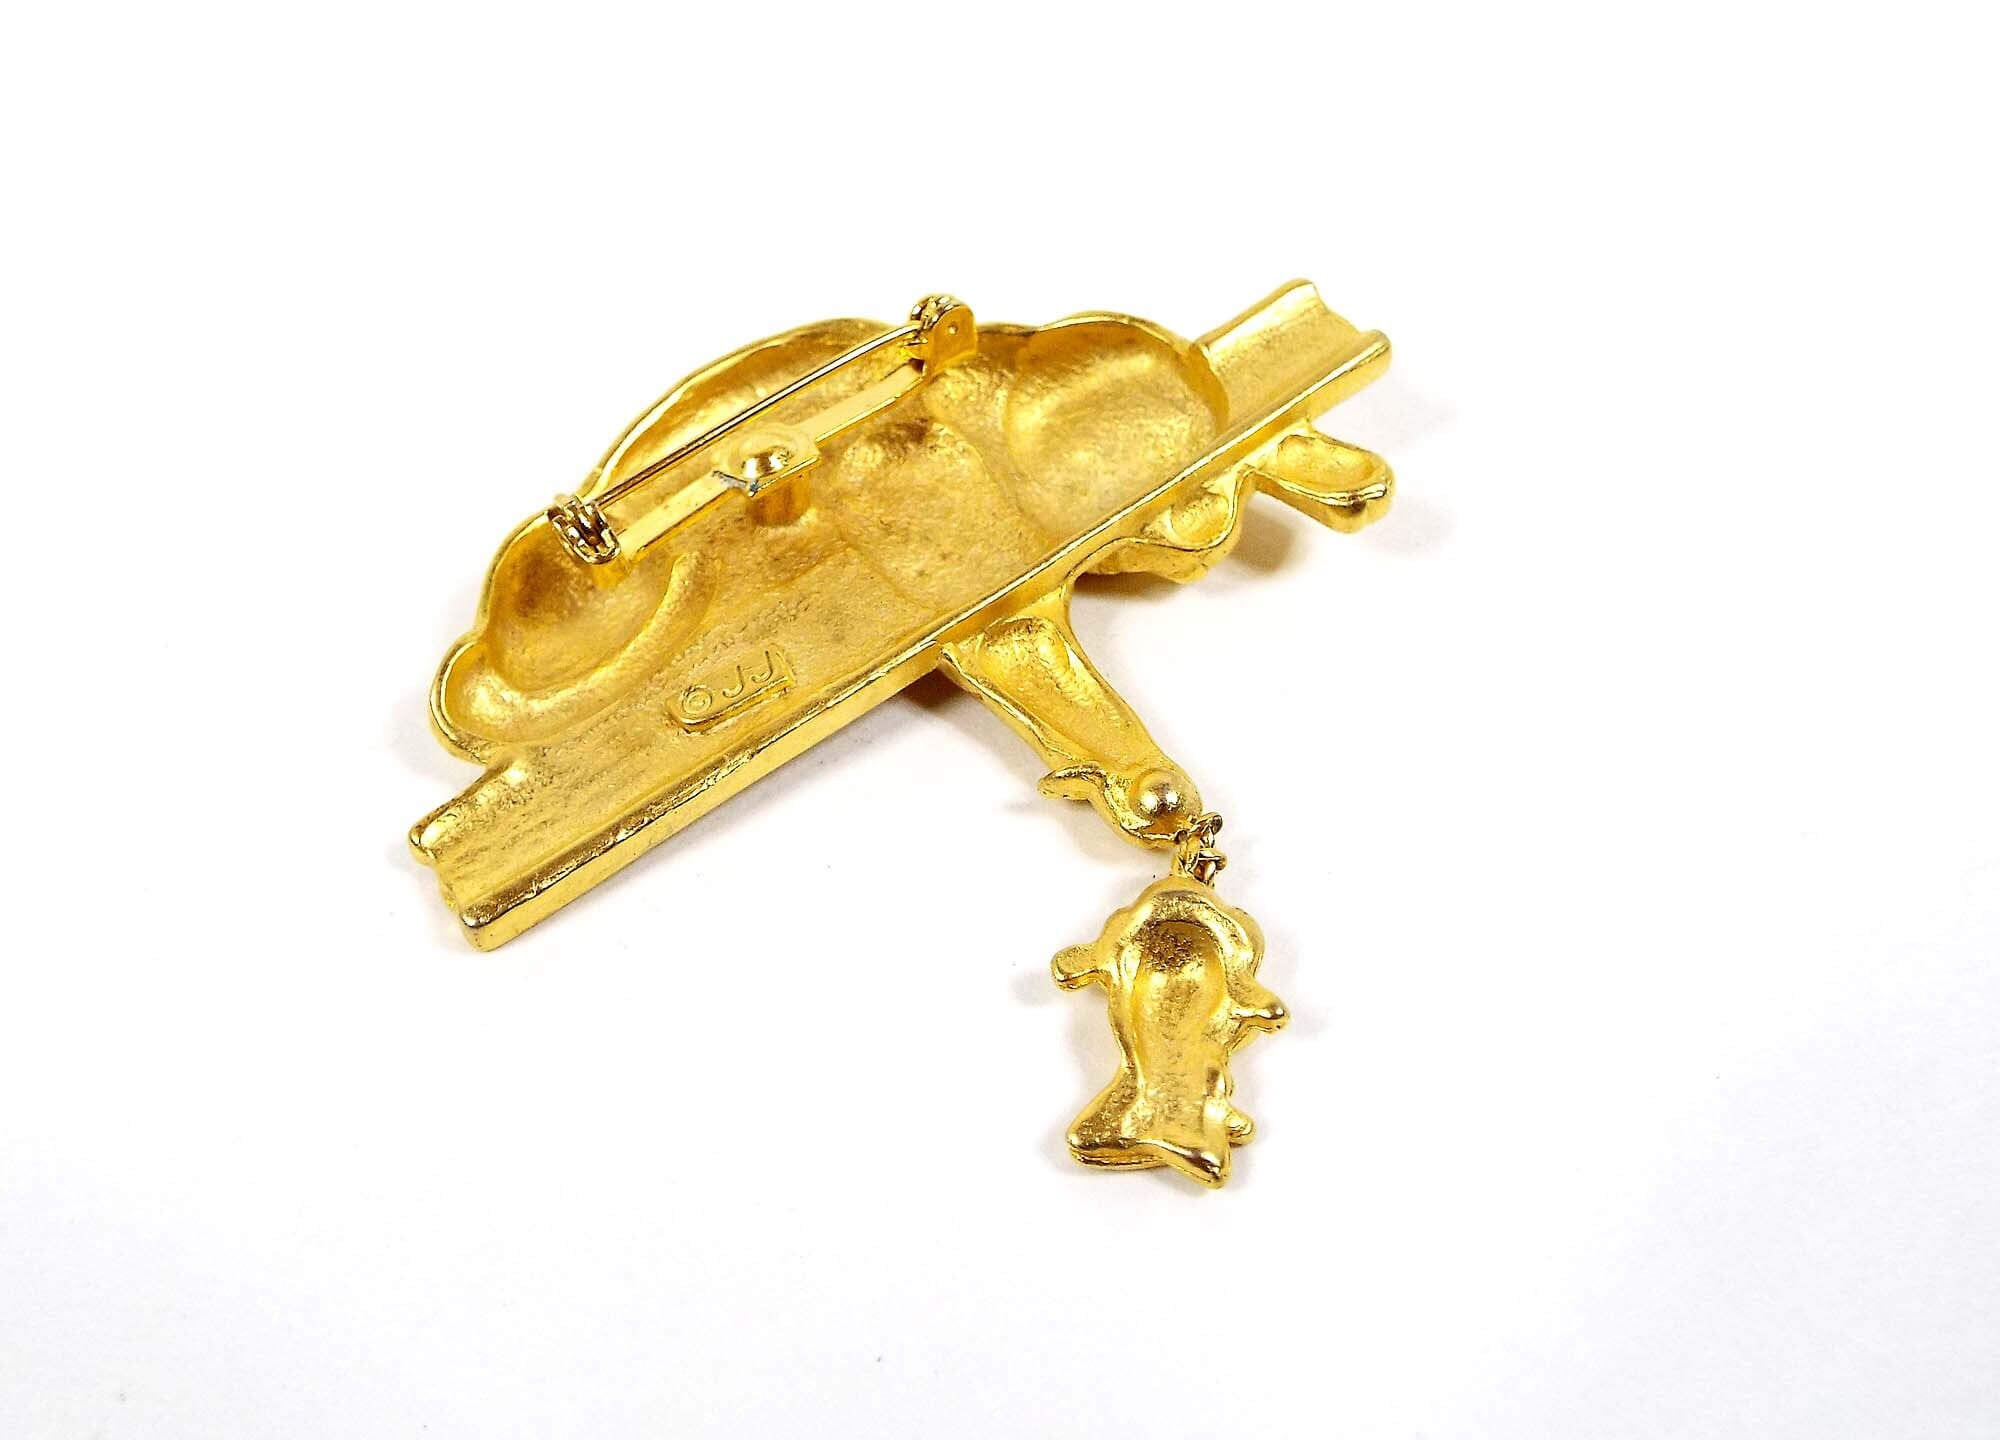 Retro 1980's JJ Gold Tone Cat and Mouse Vintage Brooch Pin